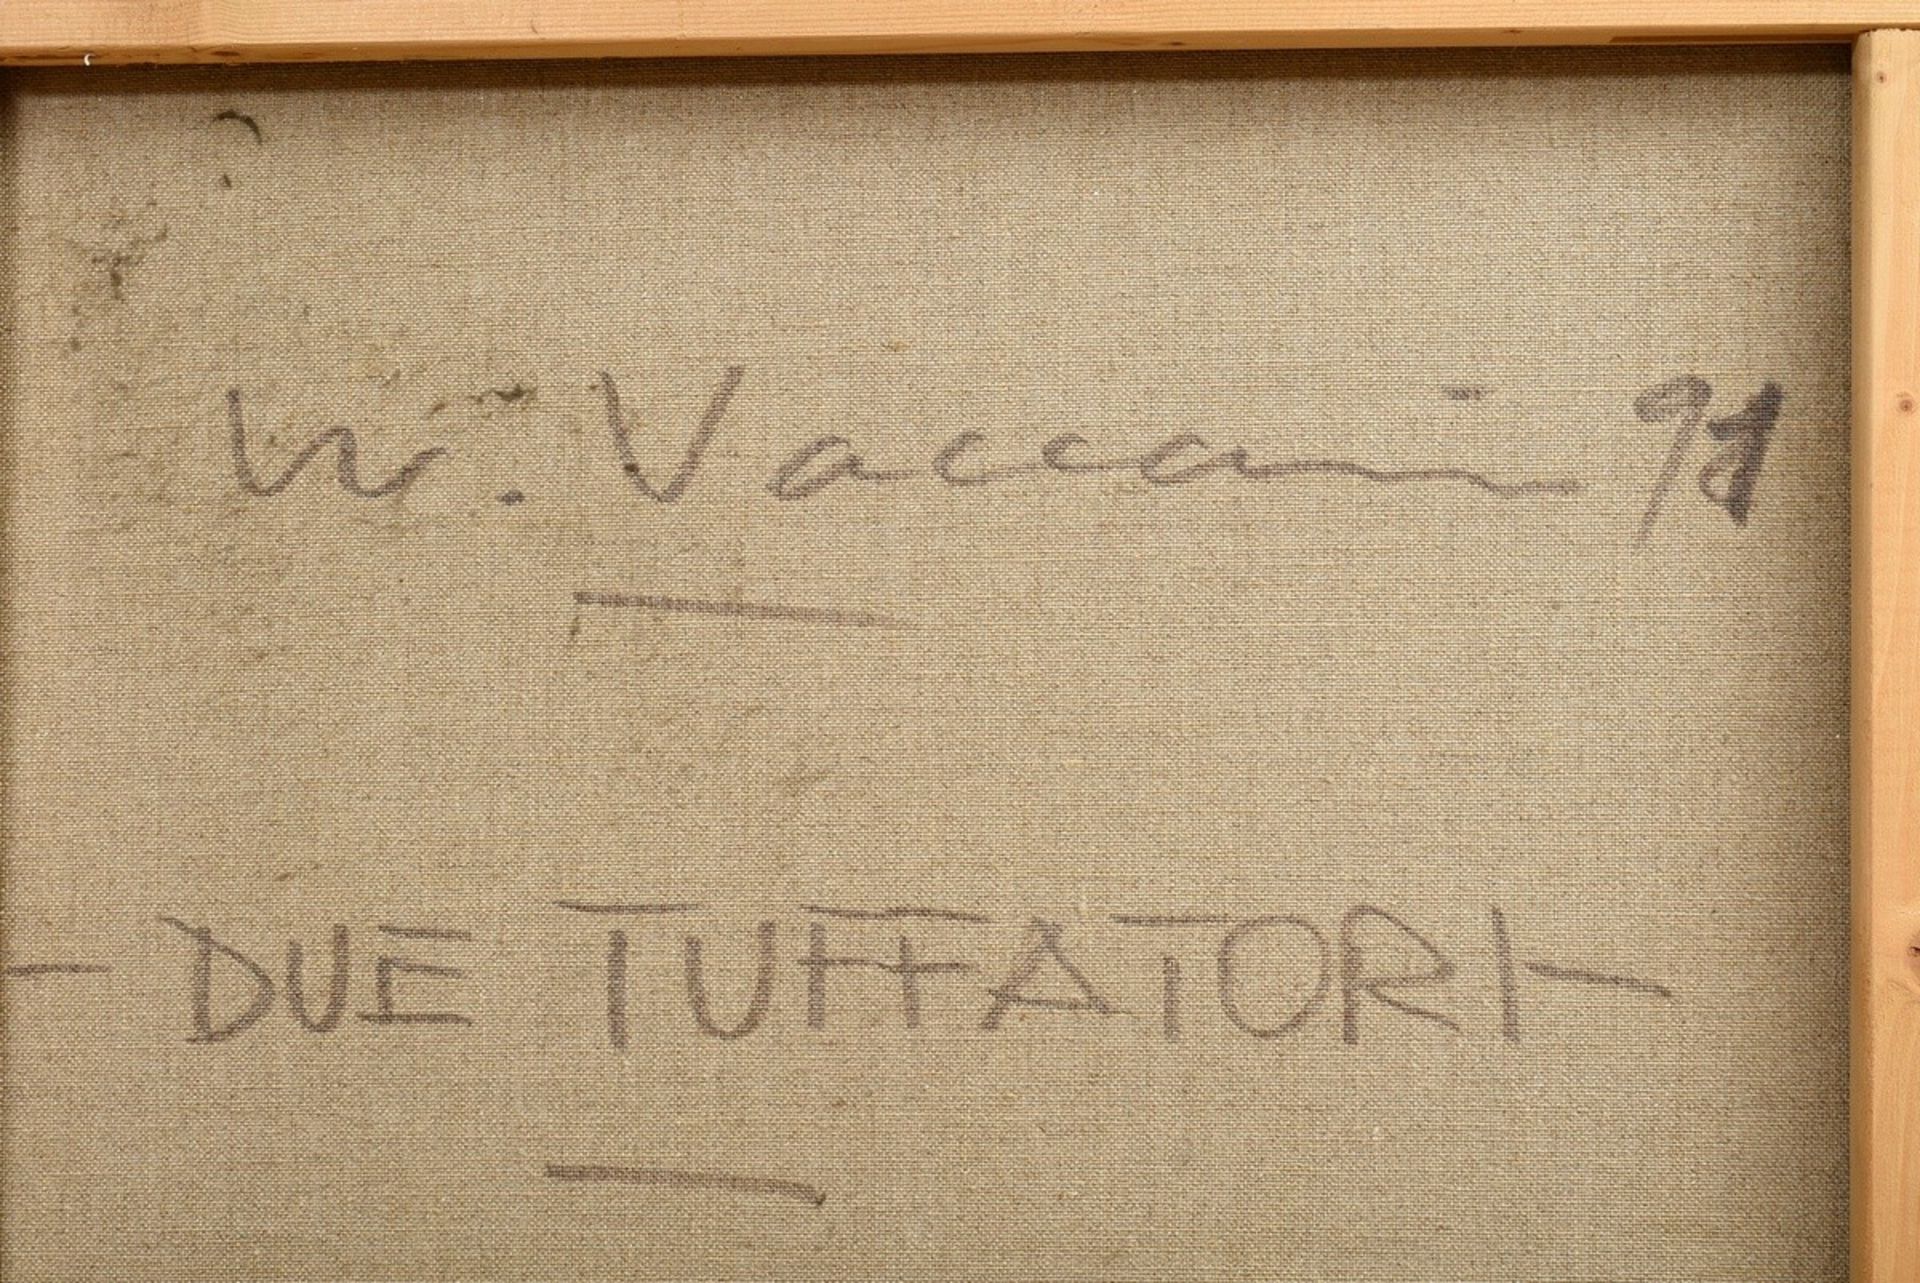 Vaccari, Wainer (*1949) "Due Tuffatori" 1991, oil/canvas, verso sign./dat. and adhesive label "Gale - Image 5 of 6